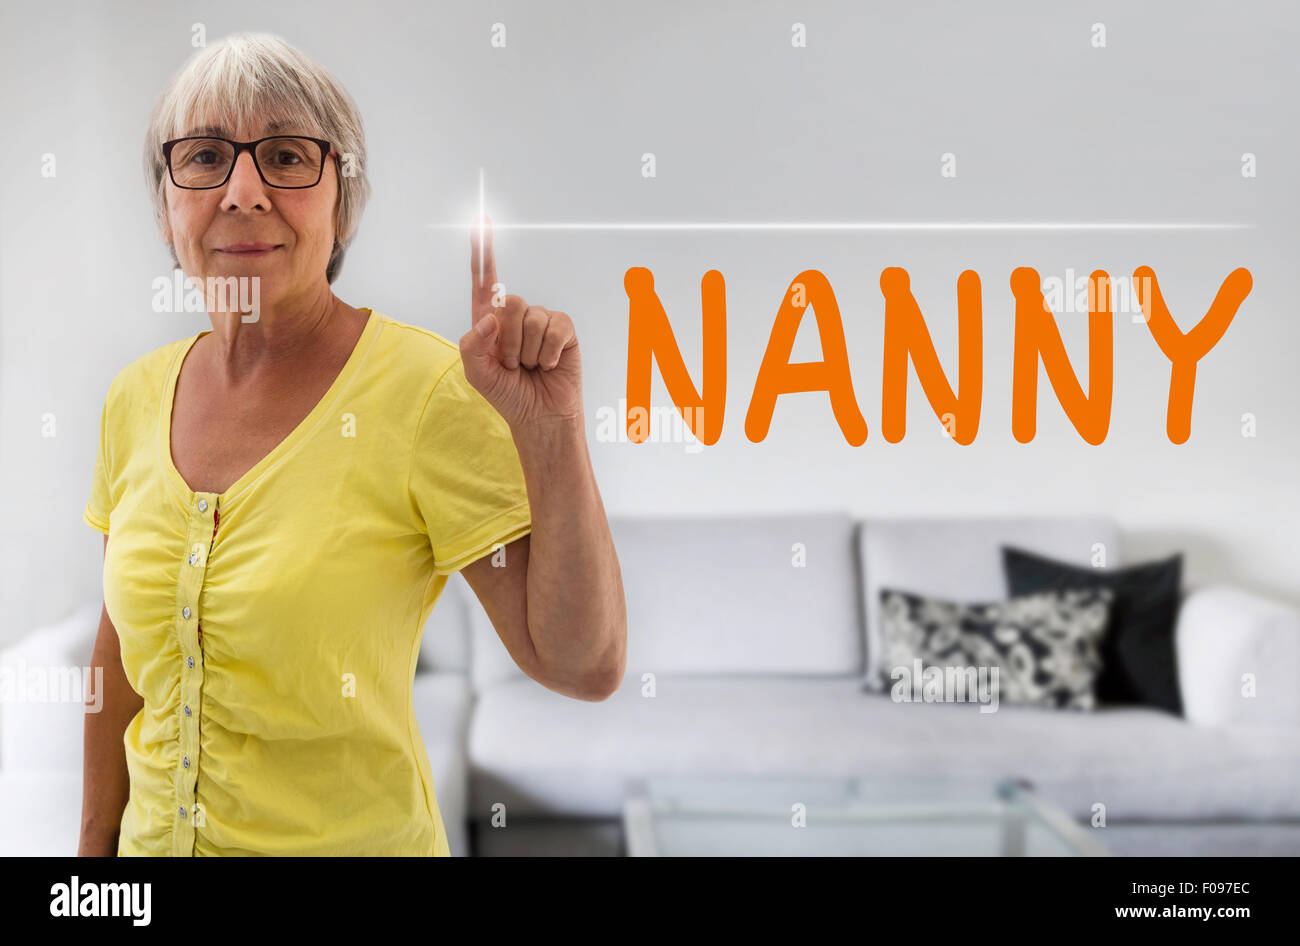 Nanny touchscreen is shown by senior. Stock Photo